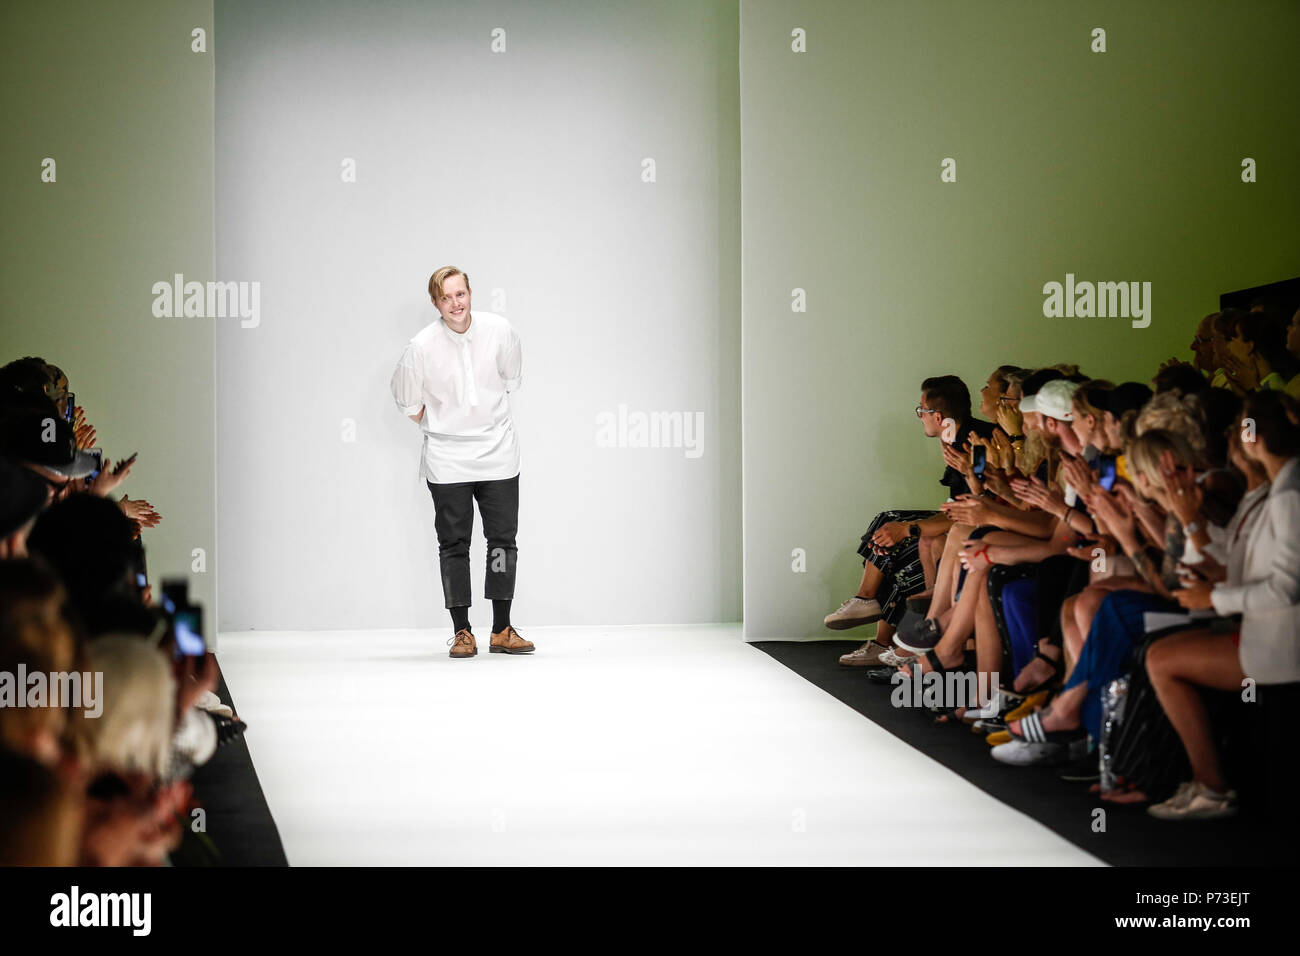 Berlin, Germany - July 4, 2018: Danny Reinke after presentation of his Spring/Summer 2019 collection during the second day of MBFW Berlin Fashion Weak in the ewerk showspace in Berlin. Credit: Michal Busko/Alamy Live News Stock Photo